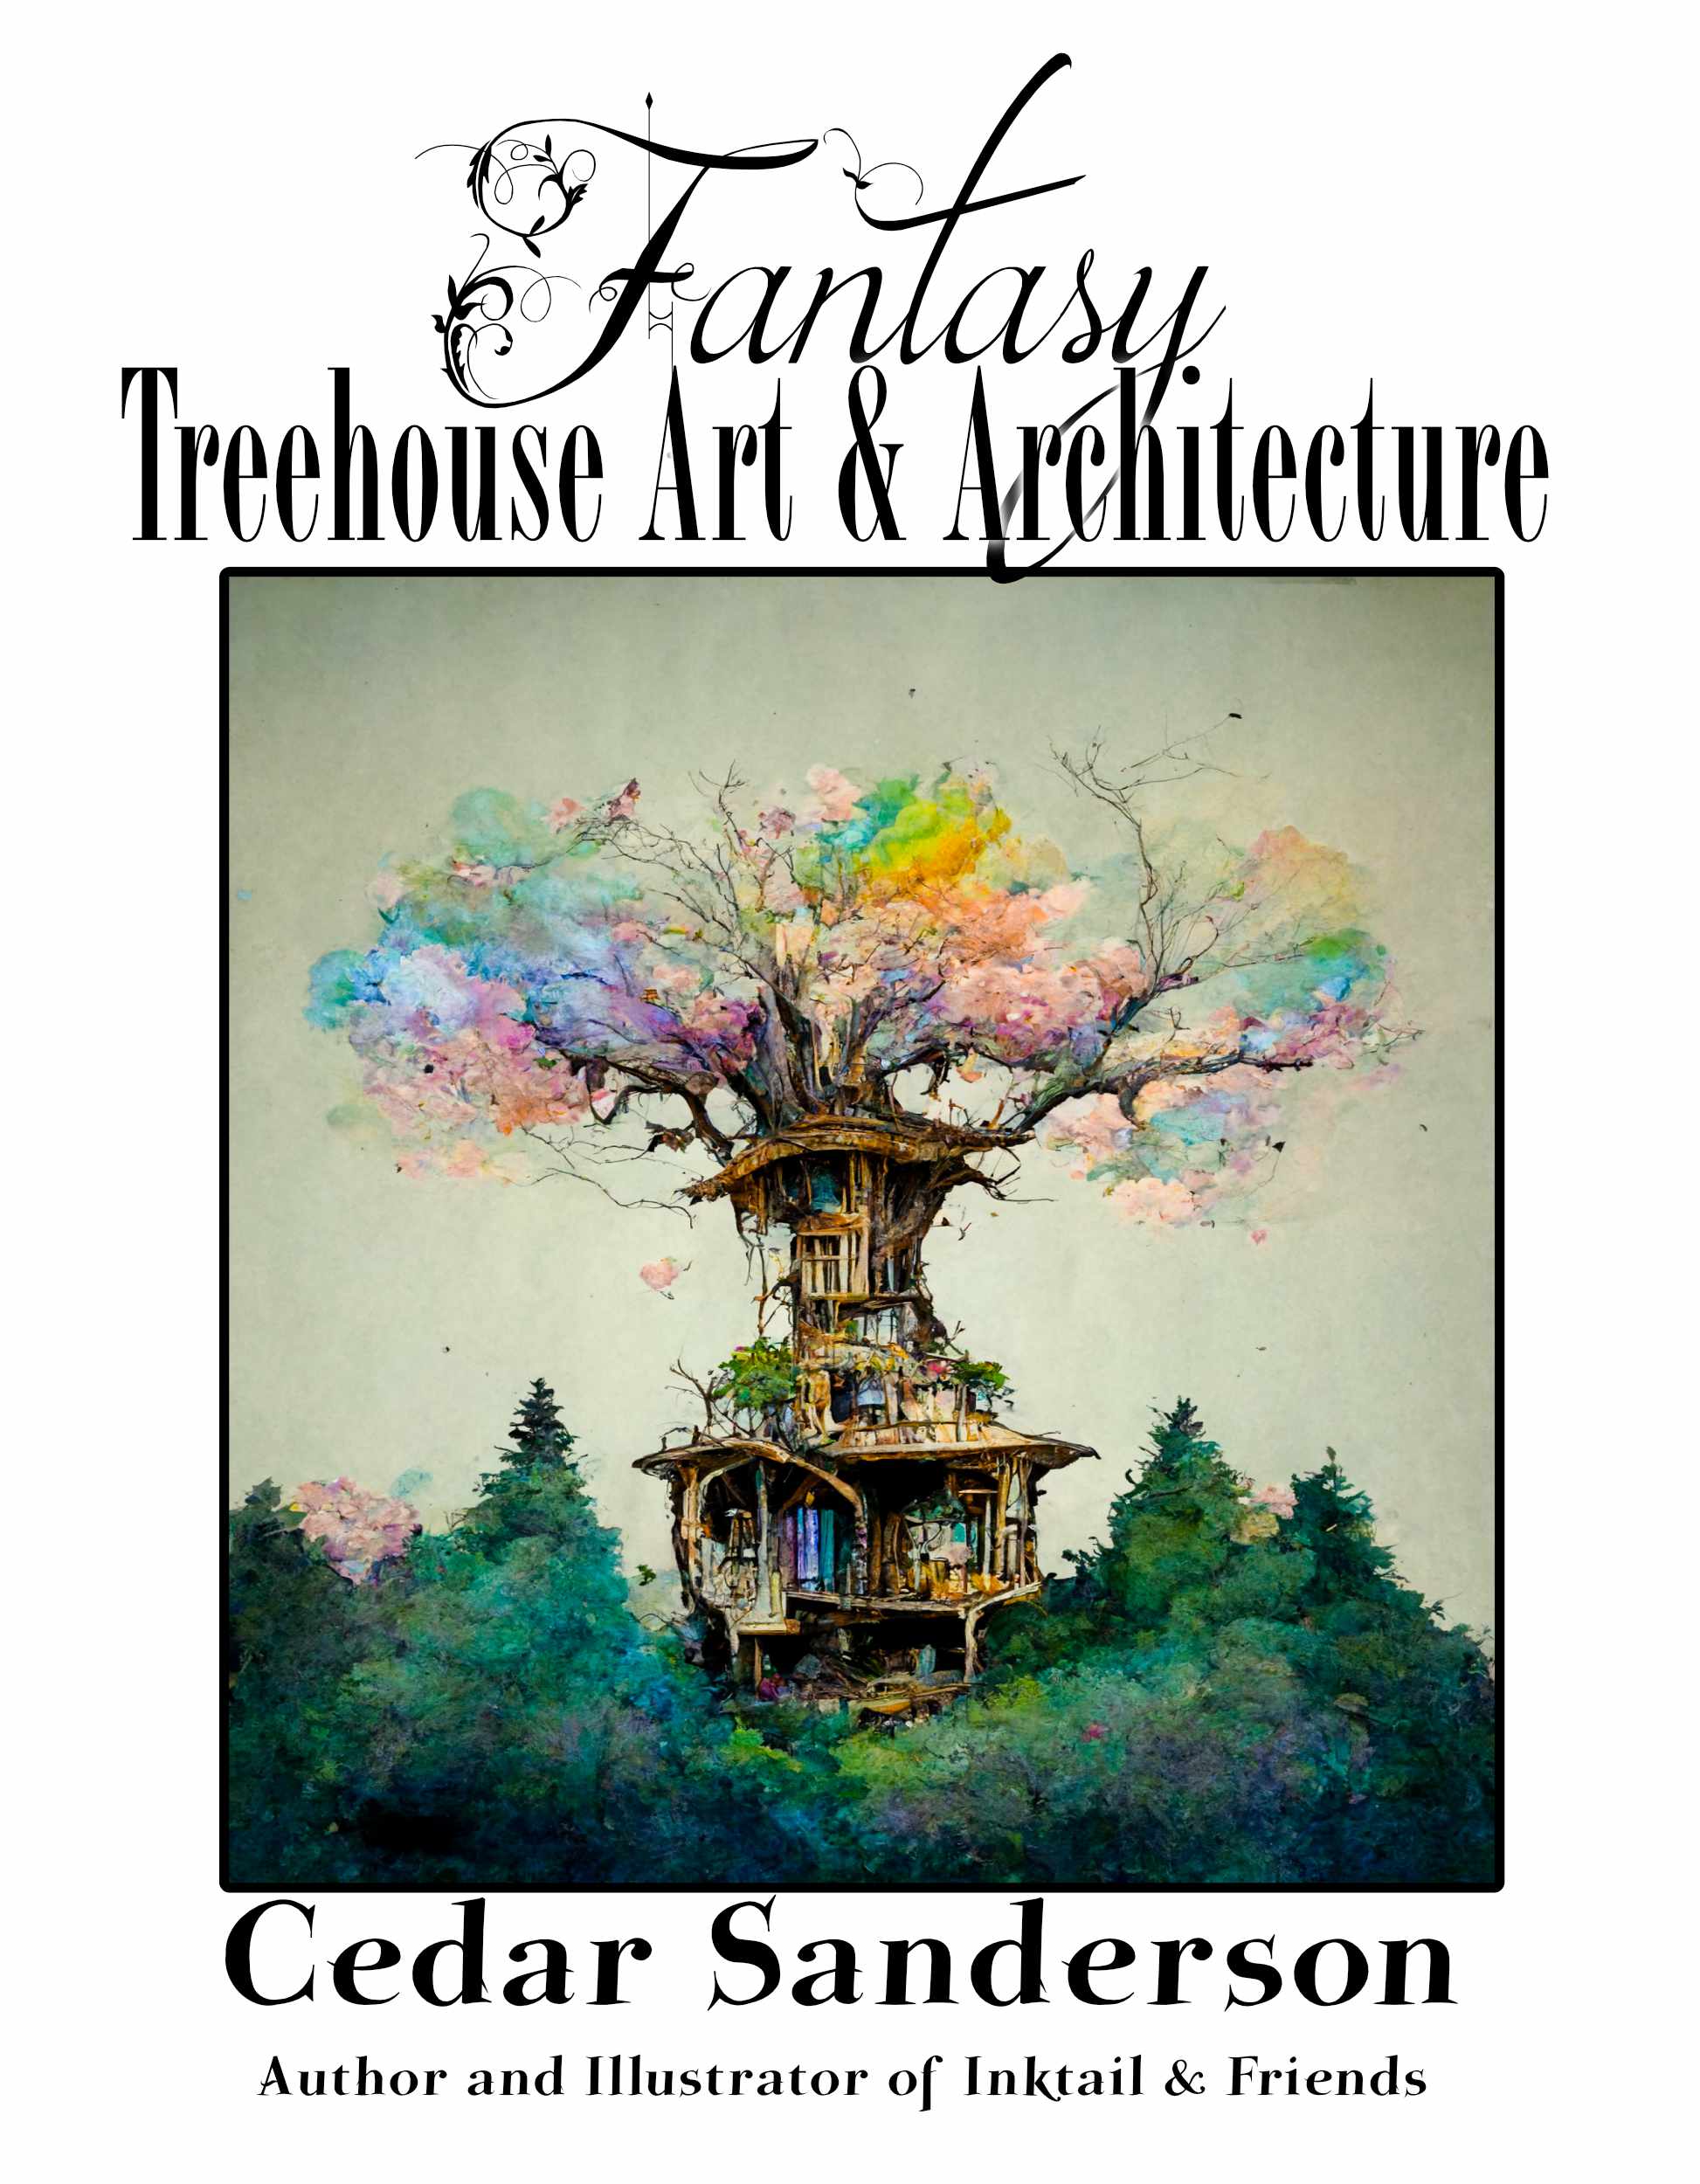 Ebook_Treehouse cover